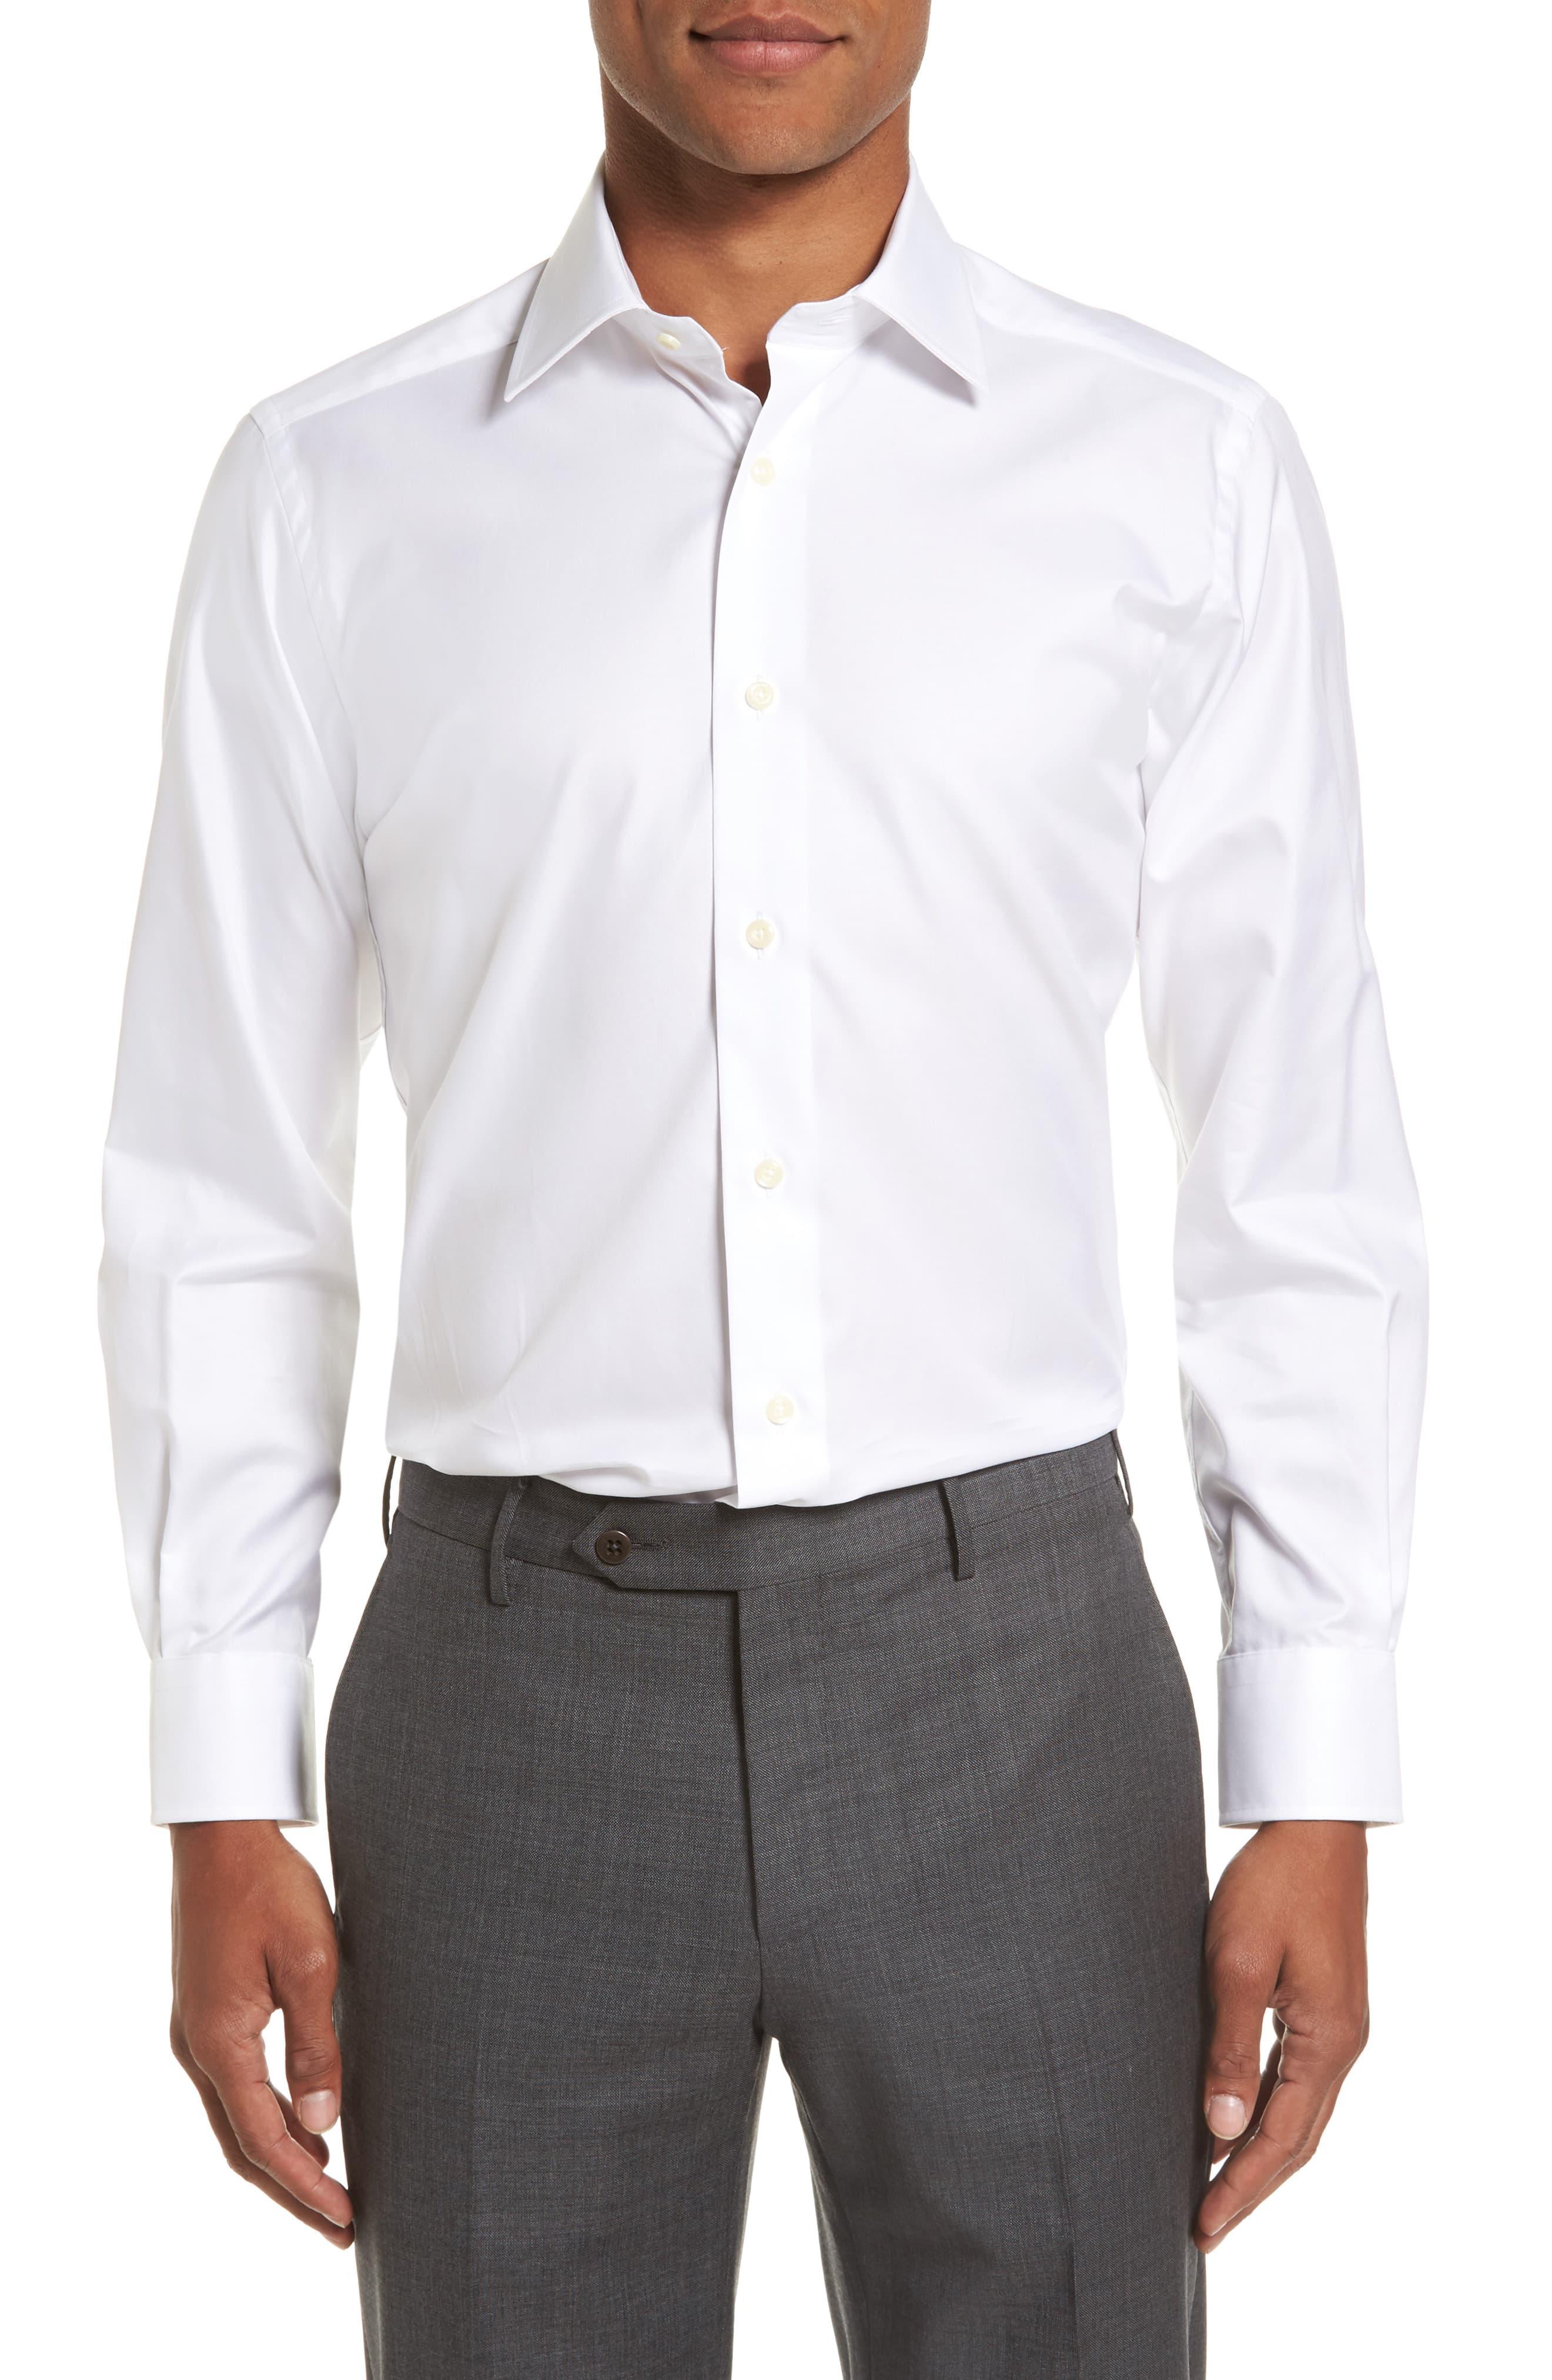 David Donahue Trim Fit Solid Dress Shirt in White for Men - Lyst